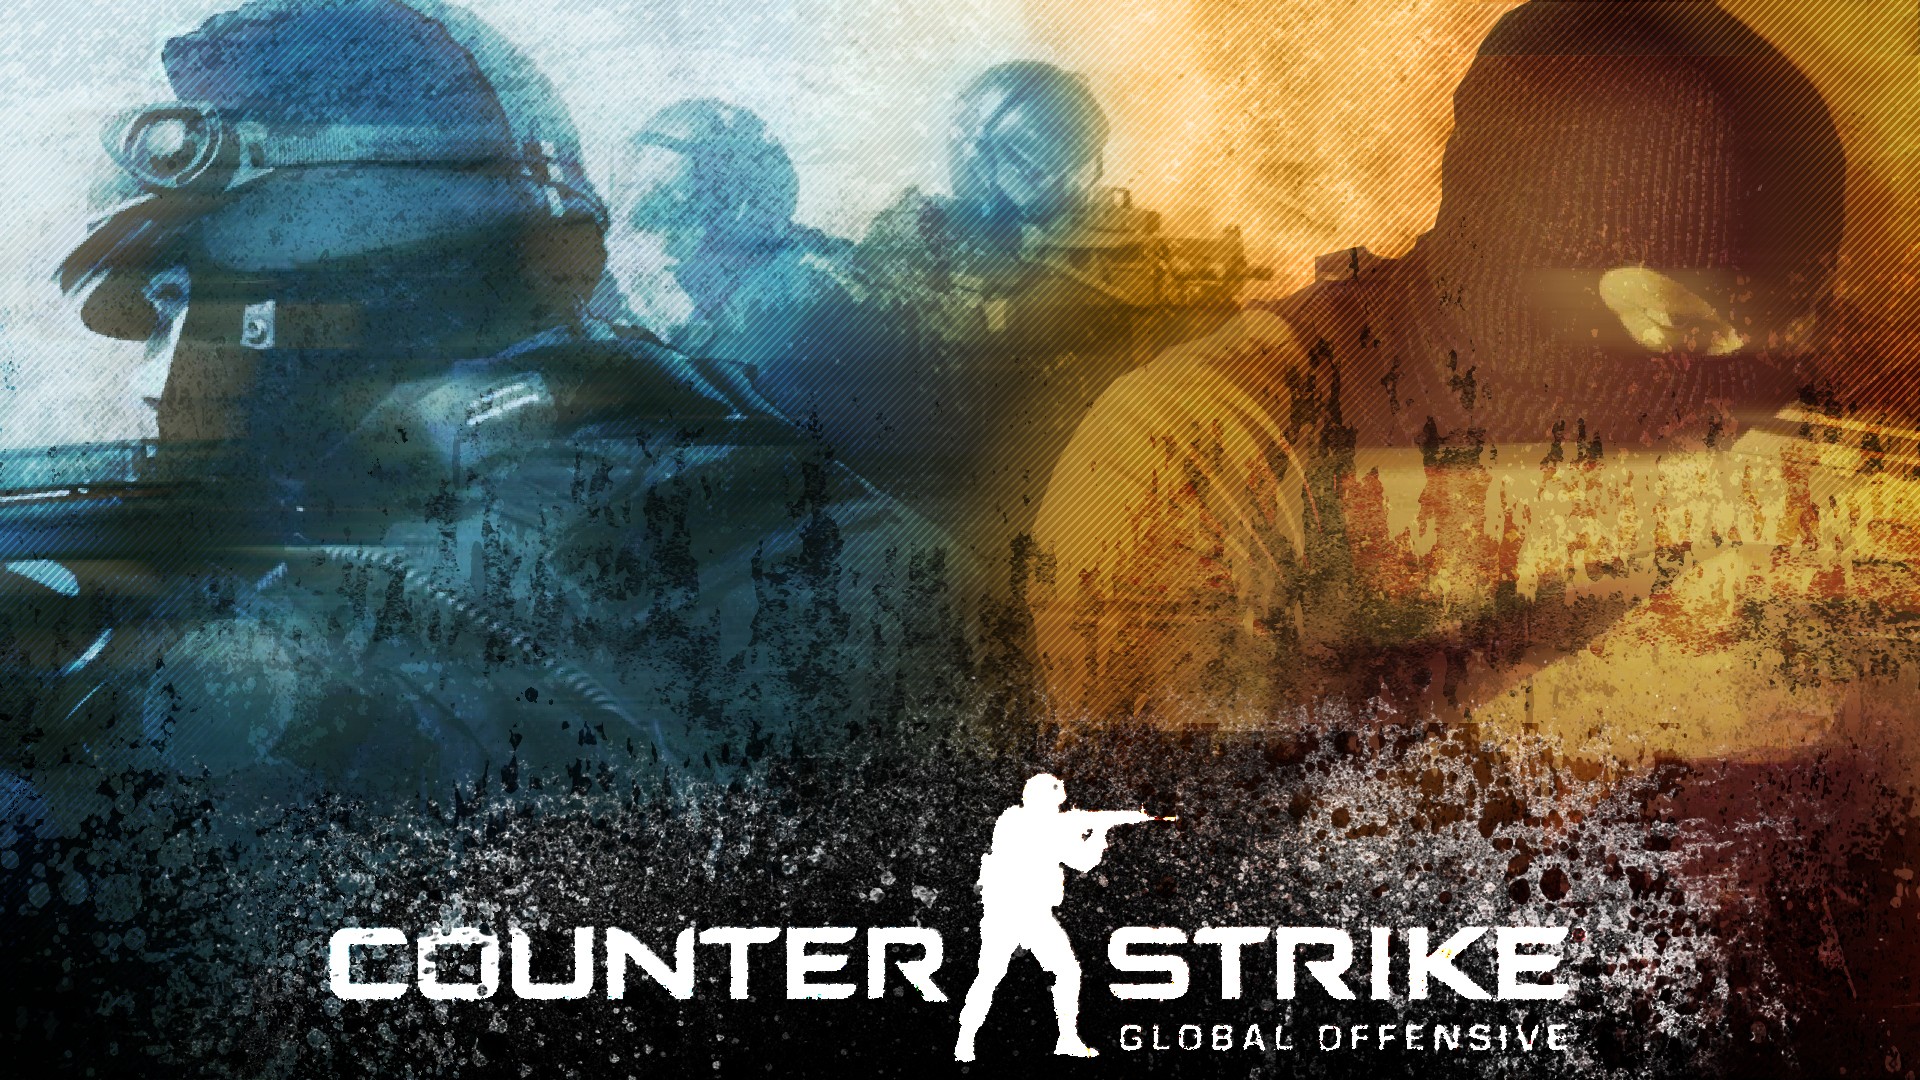 General 1920x1080 Counter-Strike Counter-Strike: Global Offensive video games PC gaming